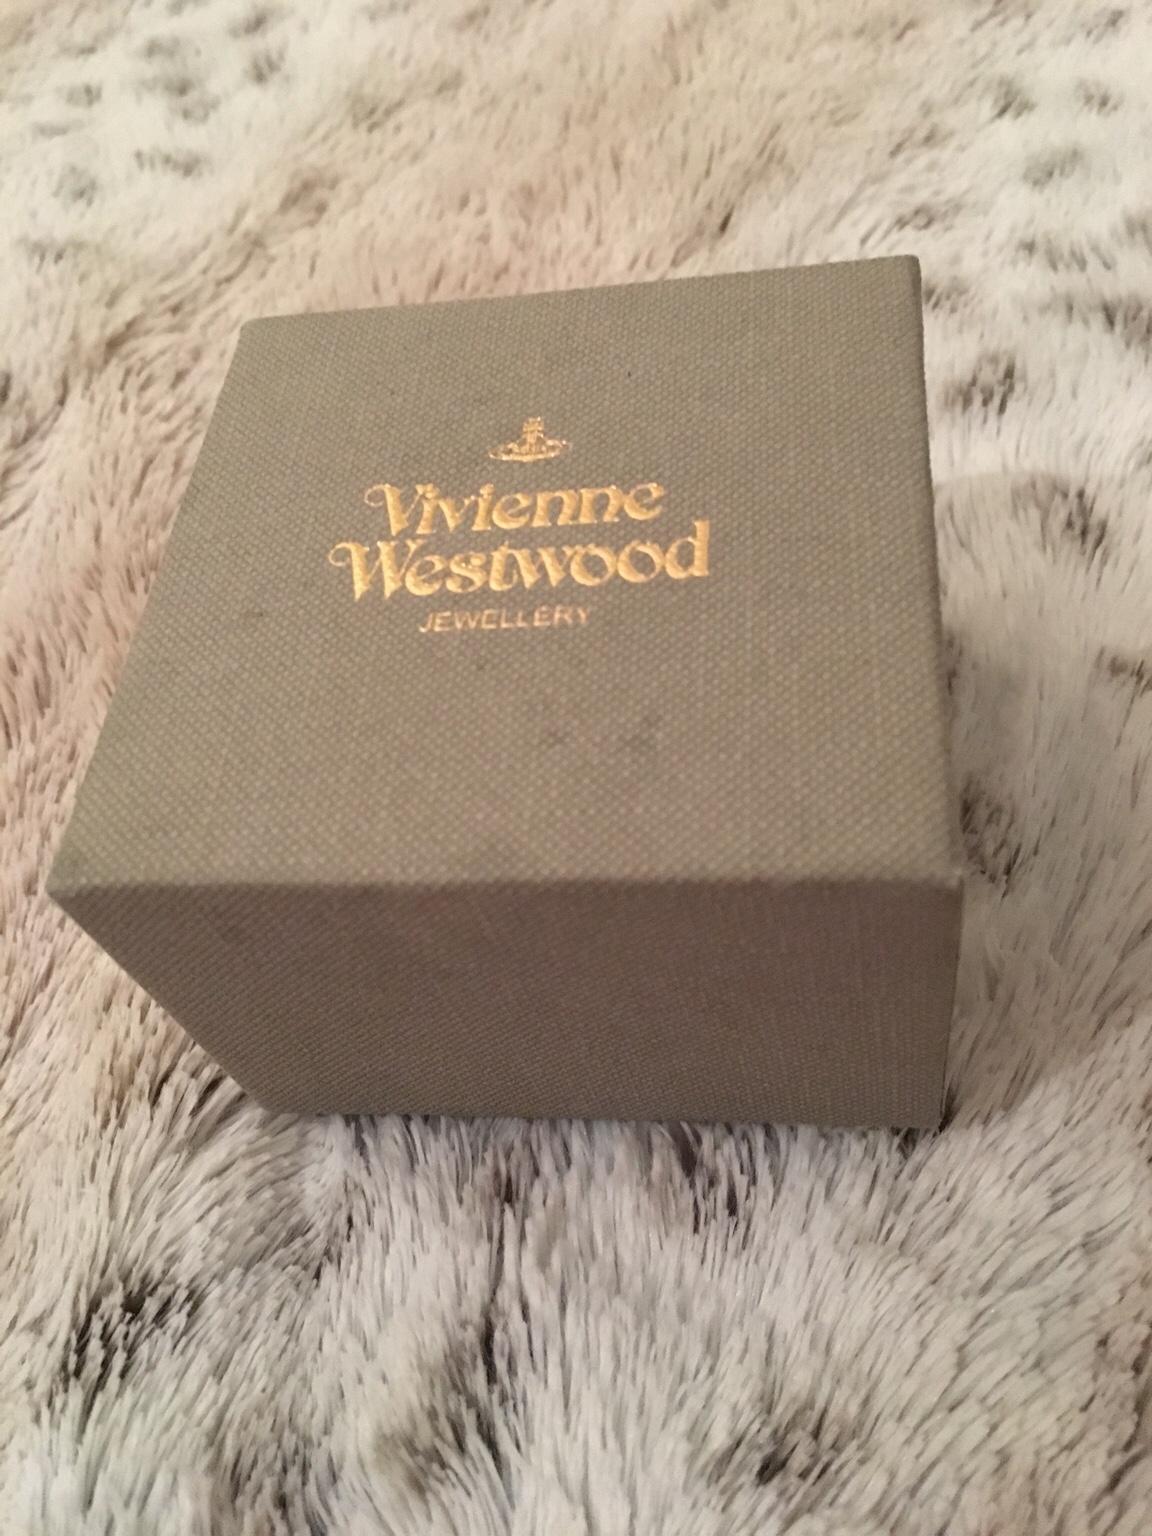 Genuine Vivienne Westwood jewellery box in WS7 Lichfield for £10.00 for